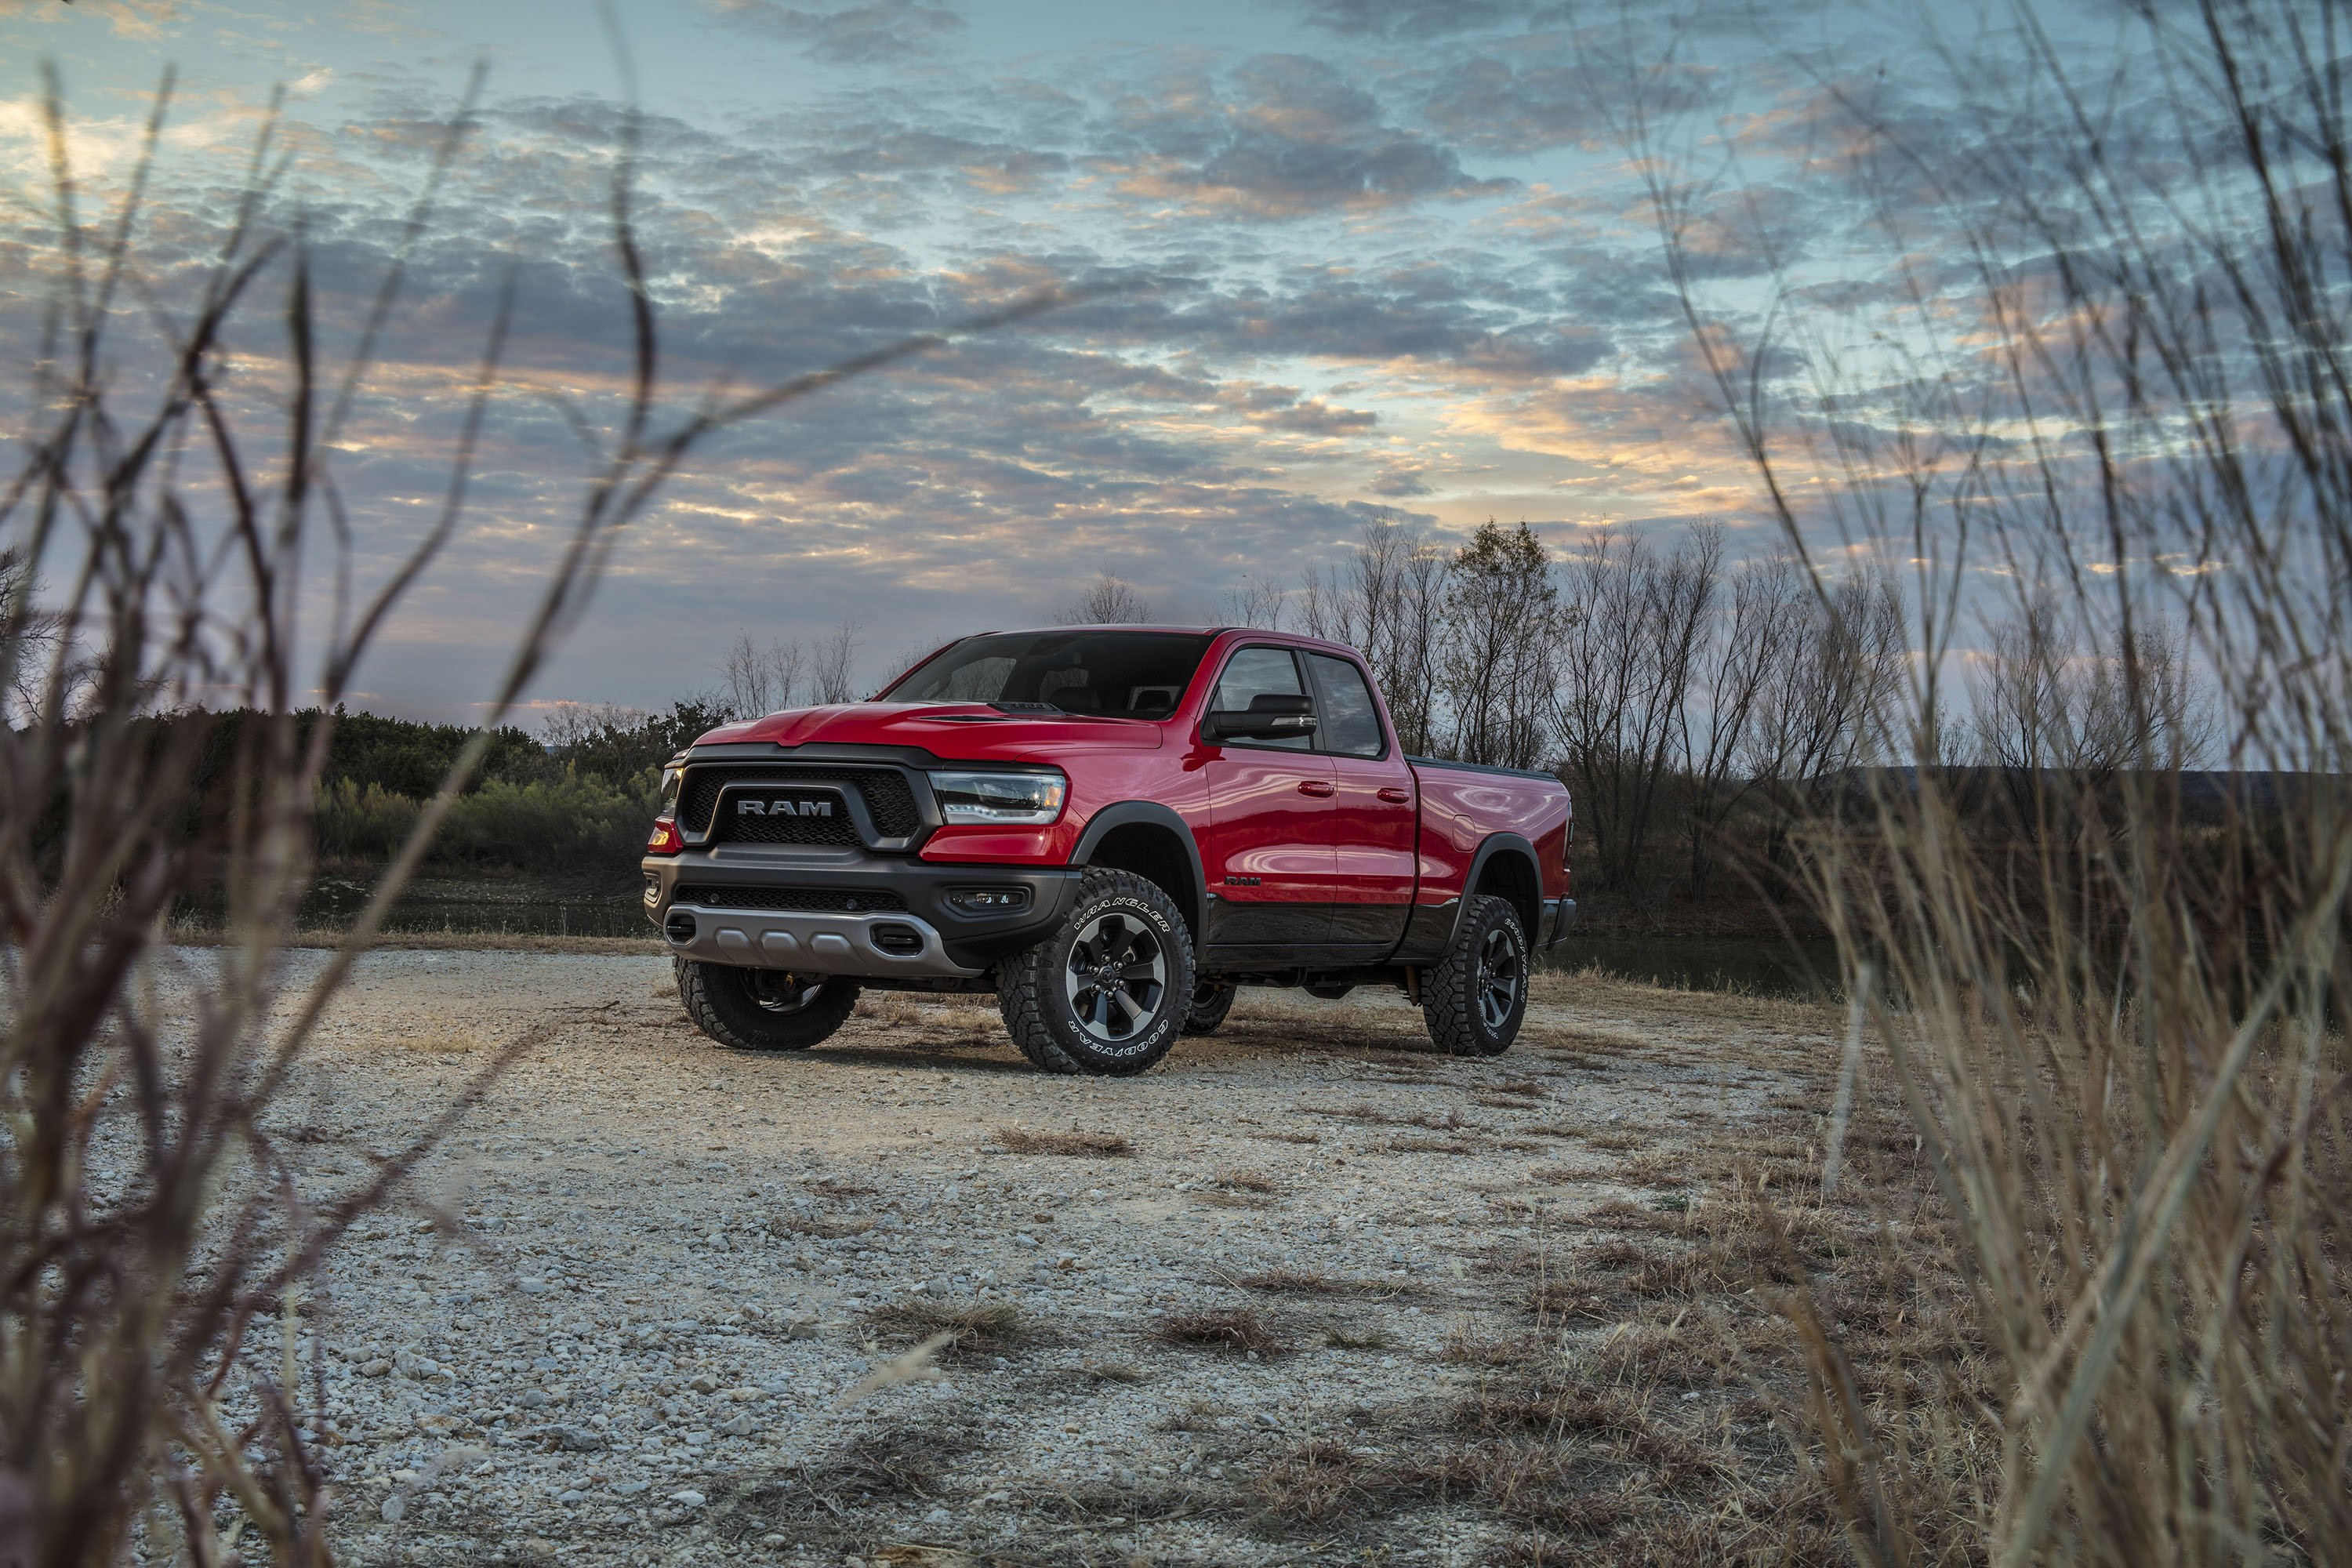 Wallpaper Of The Day: 2019 Ram 1500